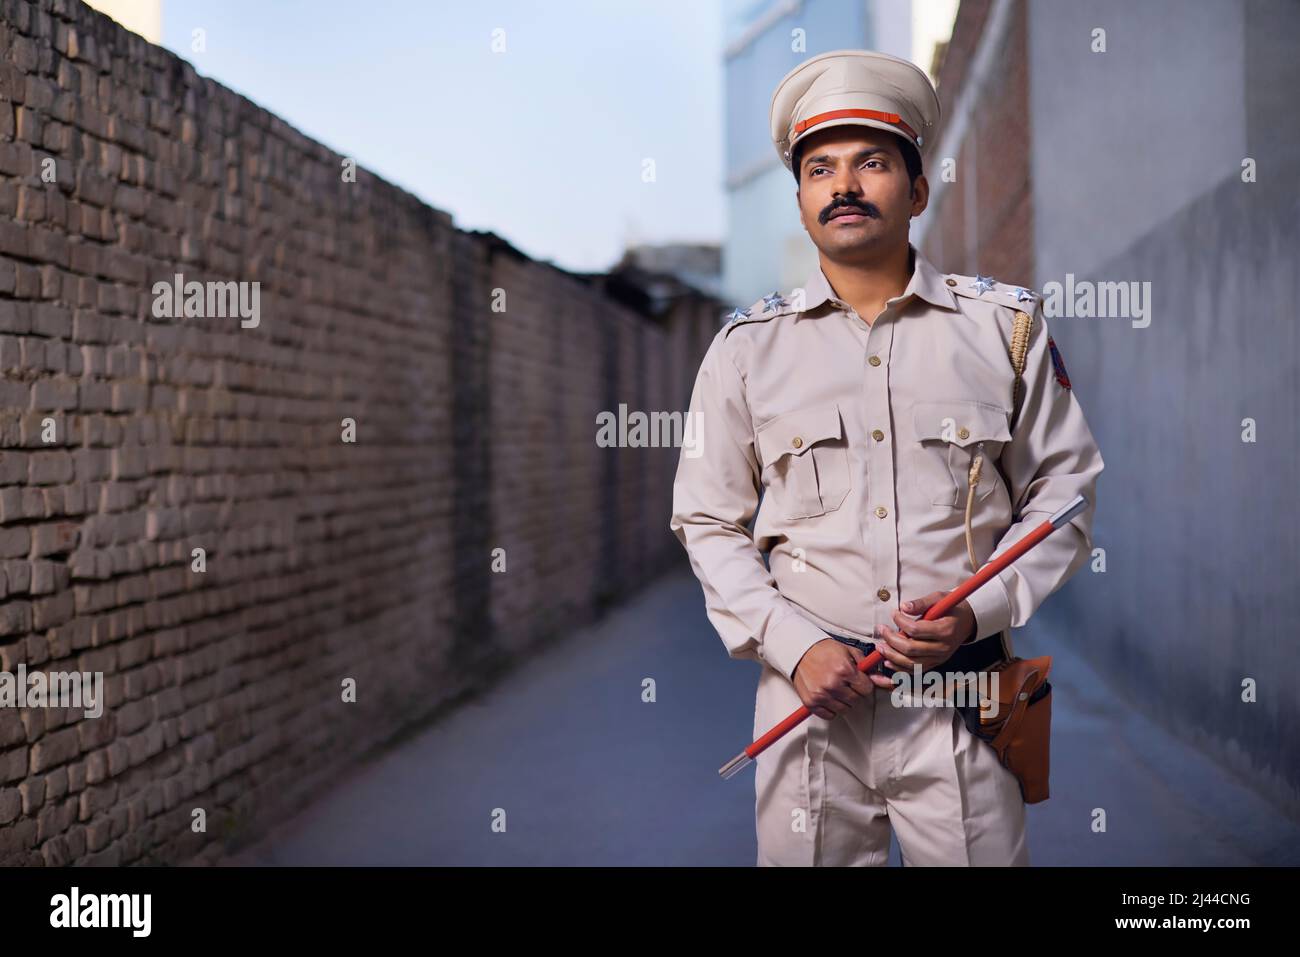 Portrait of an Indian policeman while on duty Stock Photo